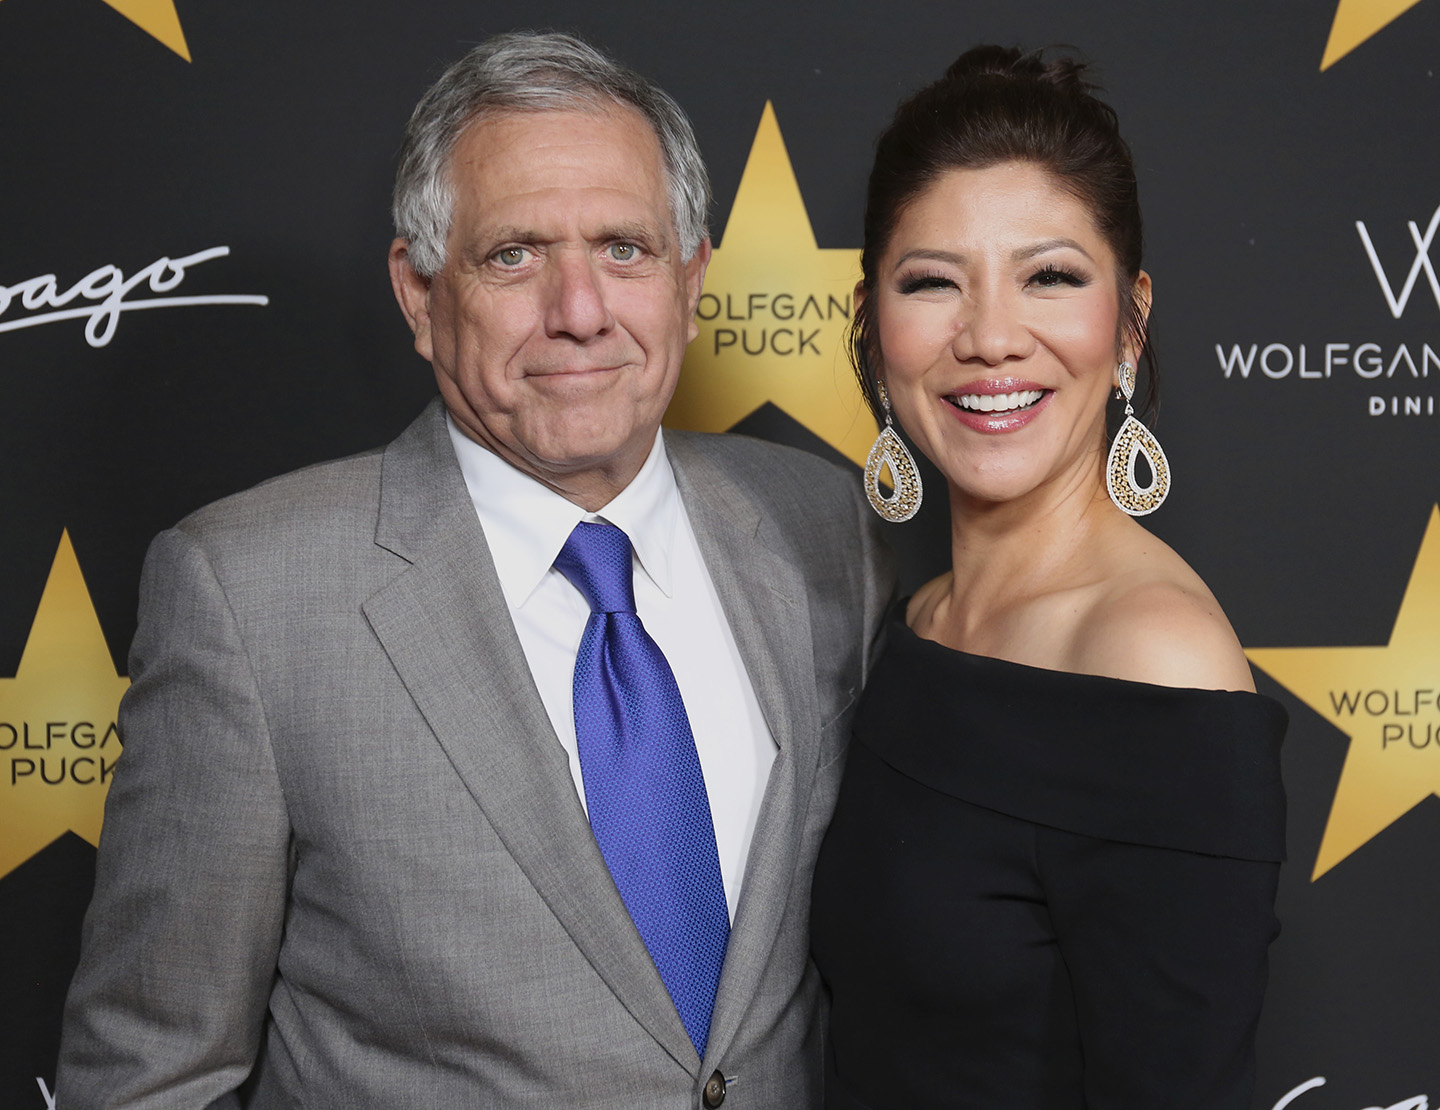 Julie Chen Is Leaving "The Talk" Following Husband Leslie Moonves's CBS